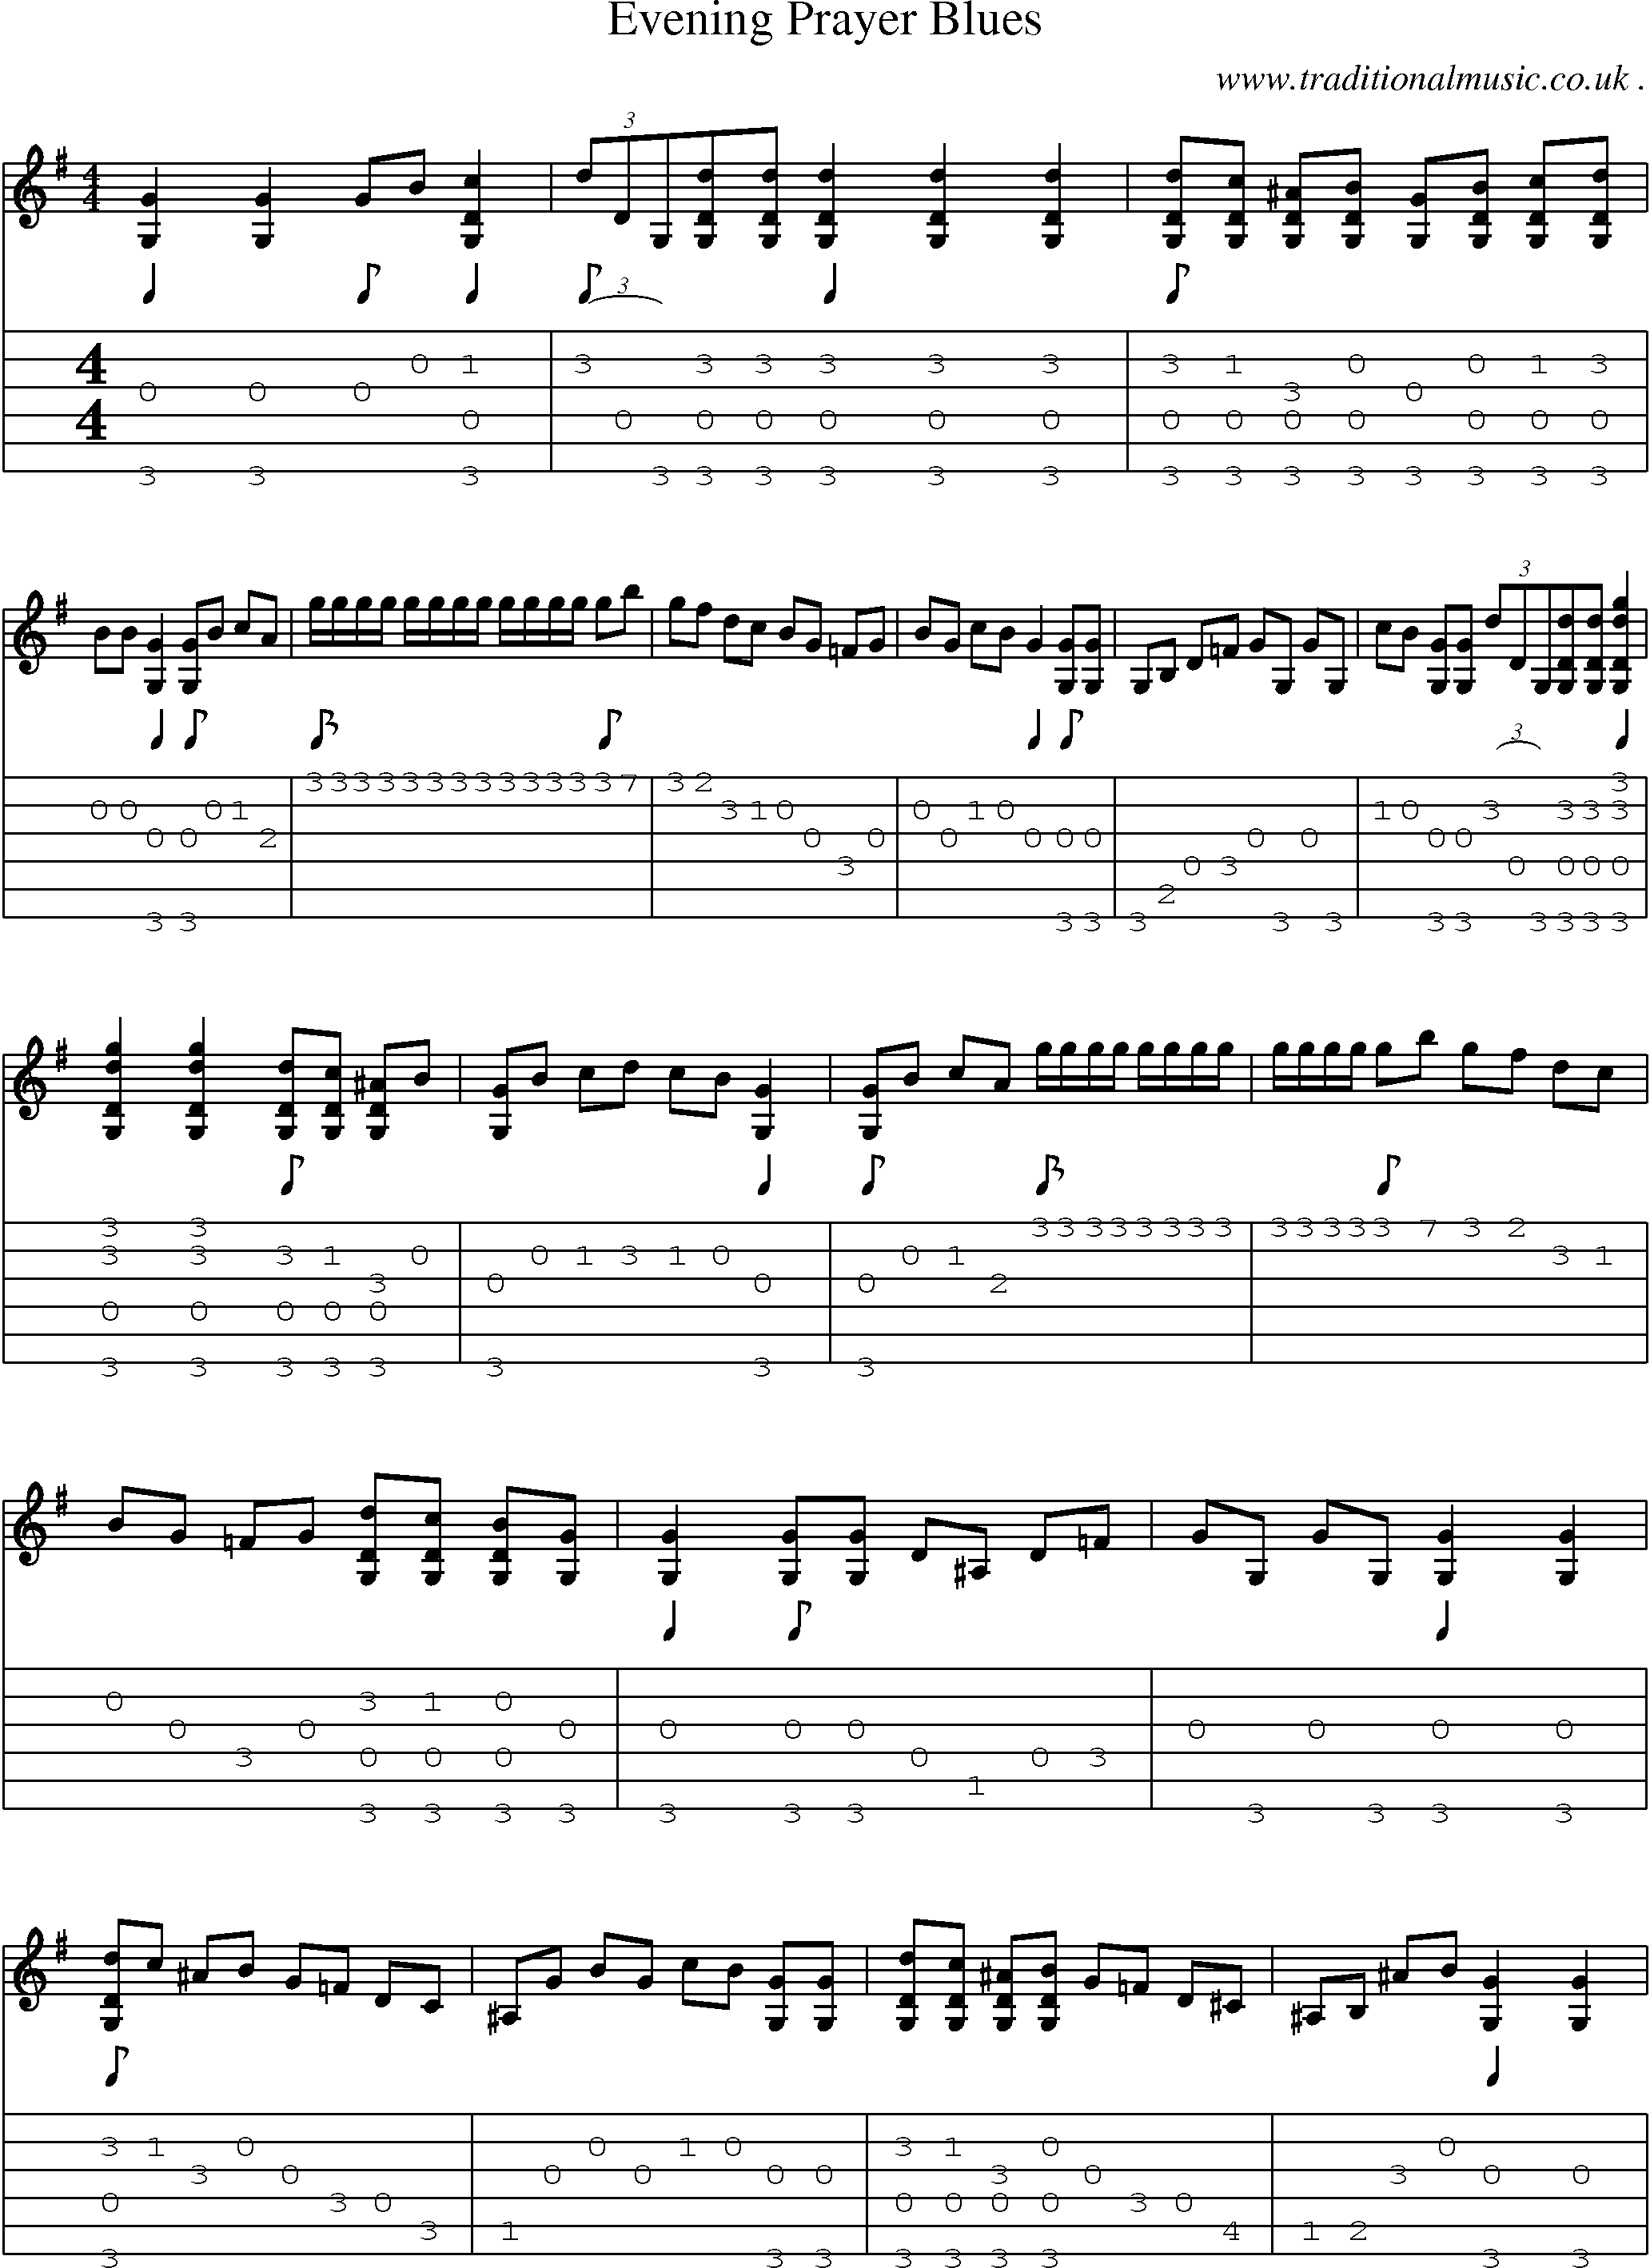 Music Score and Guitar Tabs for Evening Prayer Blues